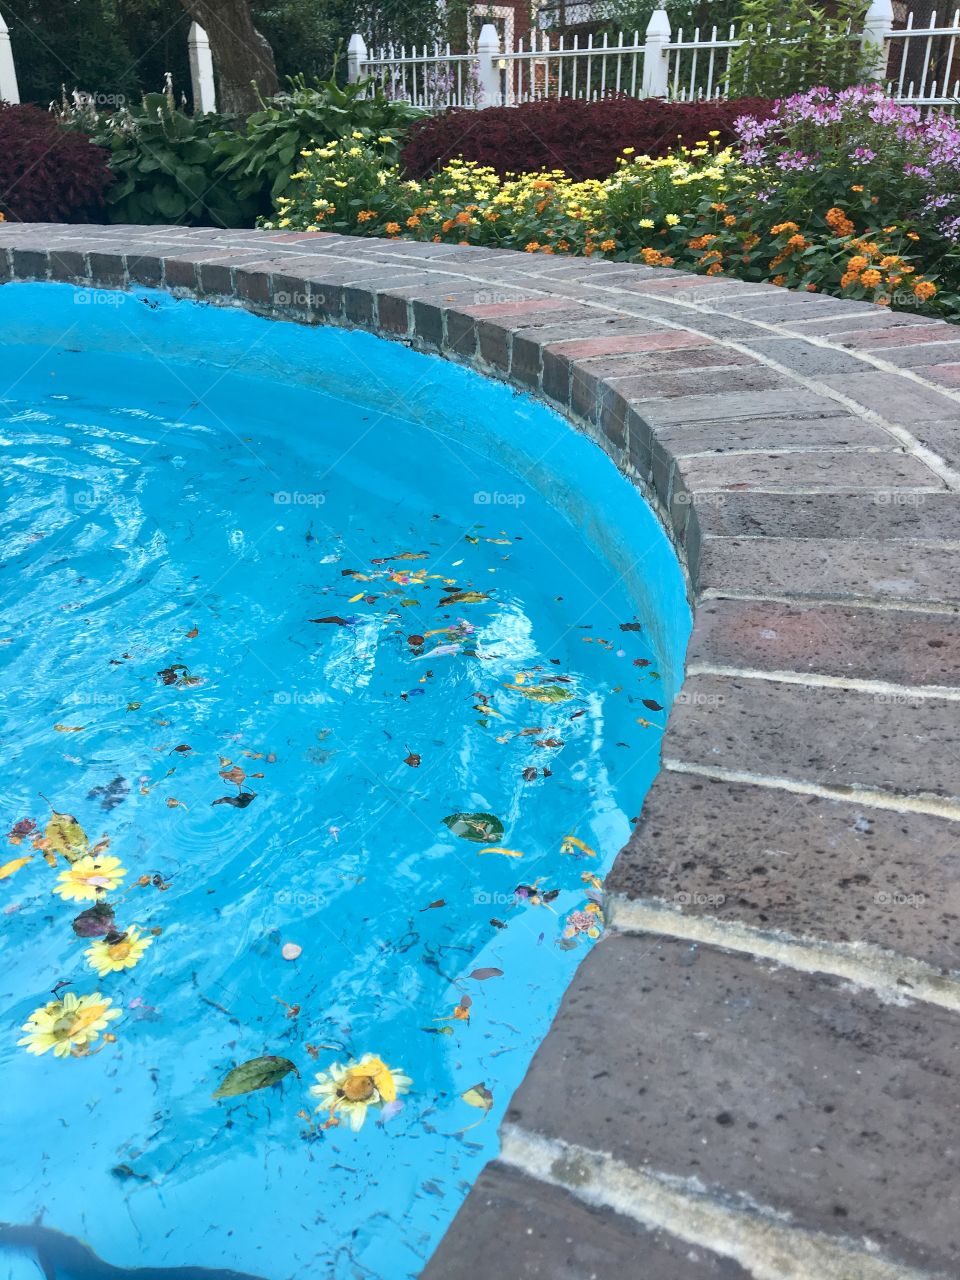 A pool filled with clear blue water sits peacefully. Tiny yellow flowers float on the surface and mingle with some leaves to create what looks like a perfumed bath. In the background, several more flowers look on